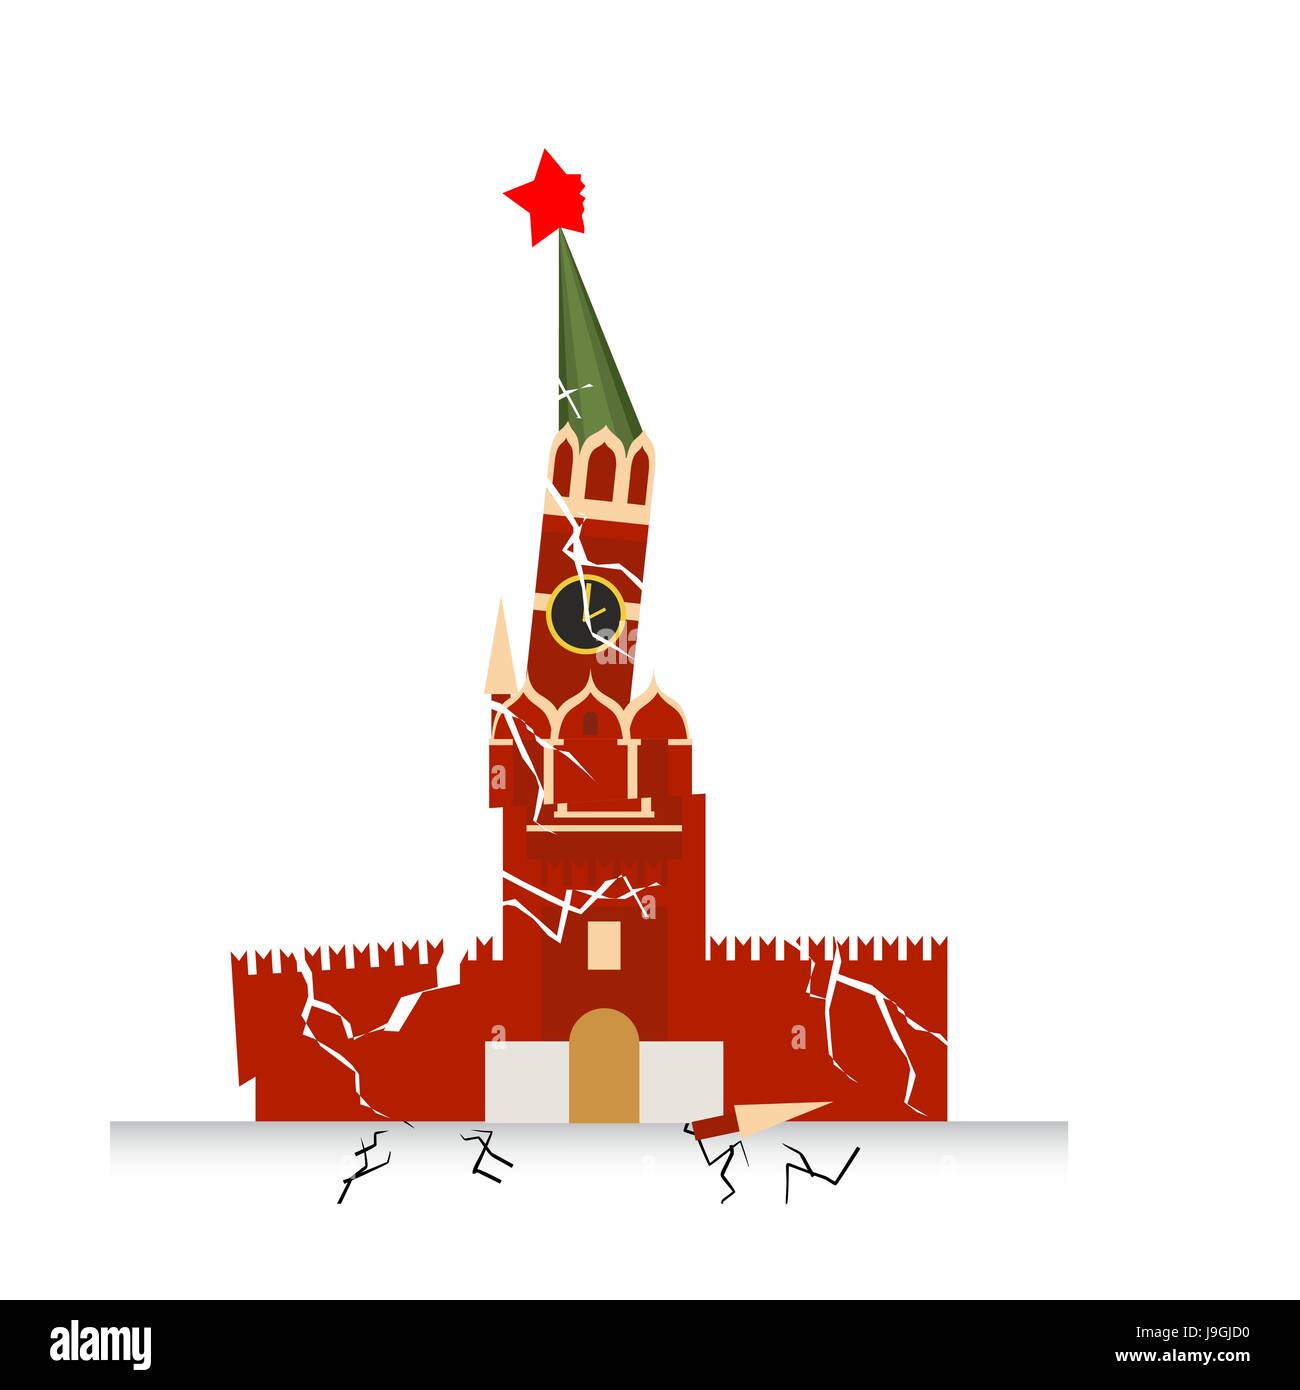 Moscow Kremlin destruction. Earth-fault earthquake. Destruction of points of interest in Russia. Russian national architecture building on red square. Stock Vector